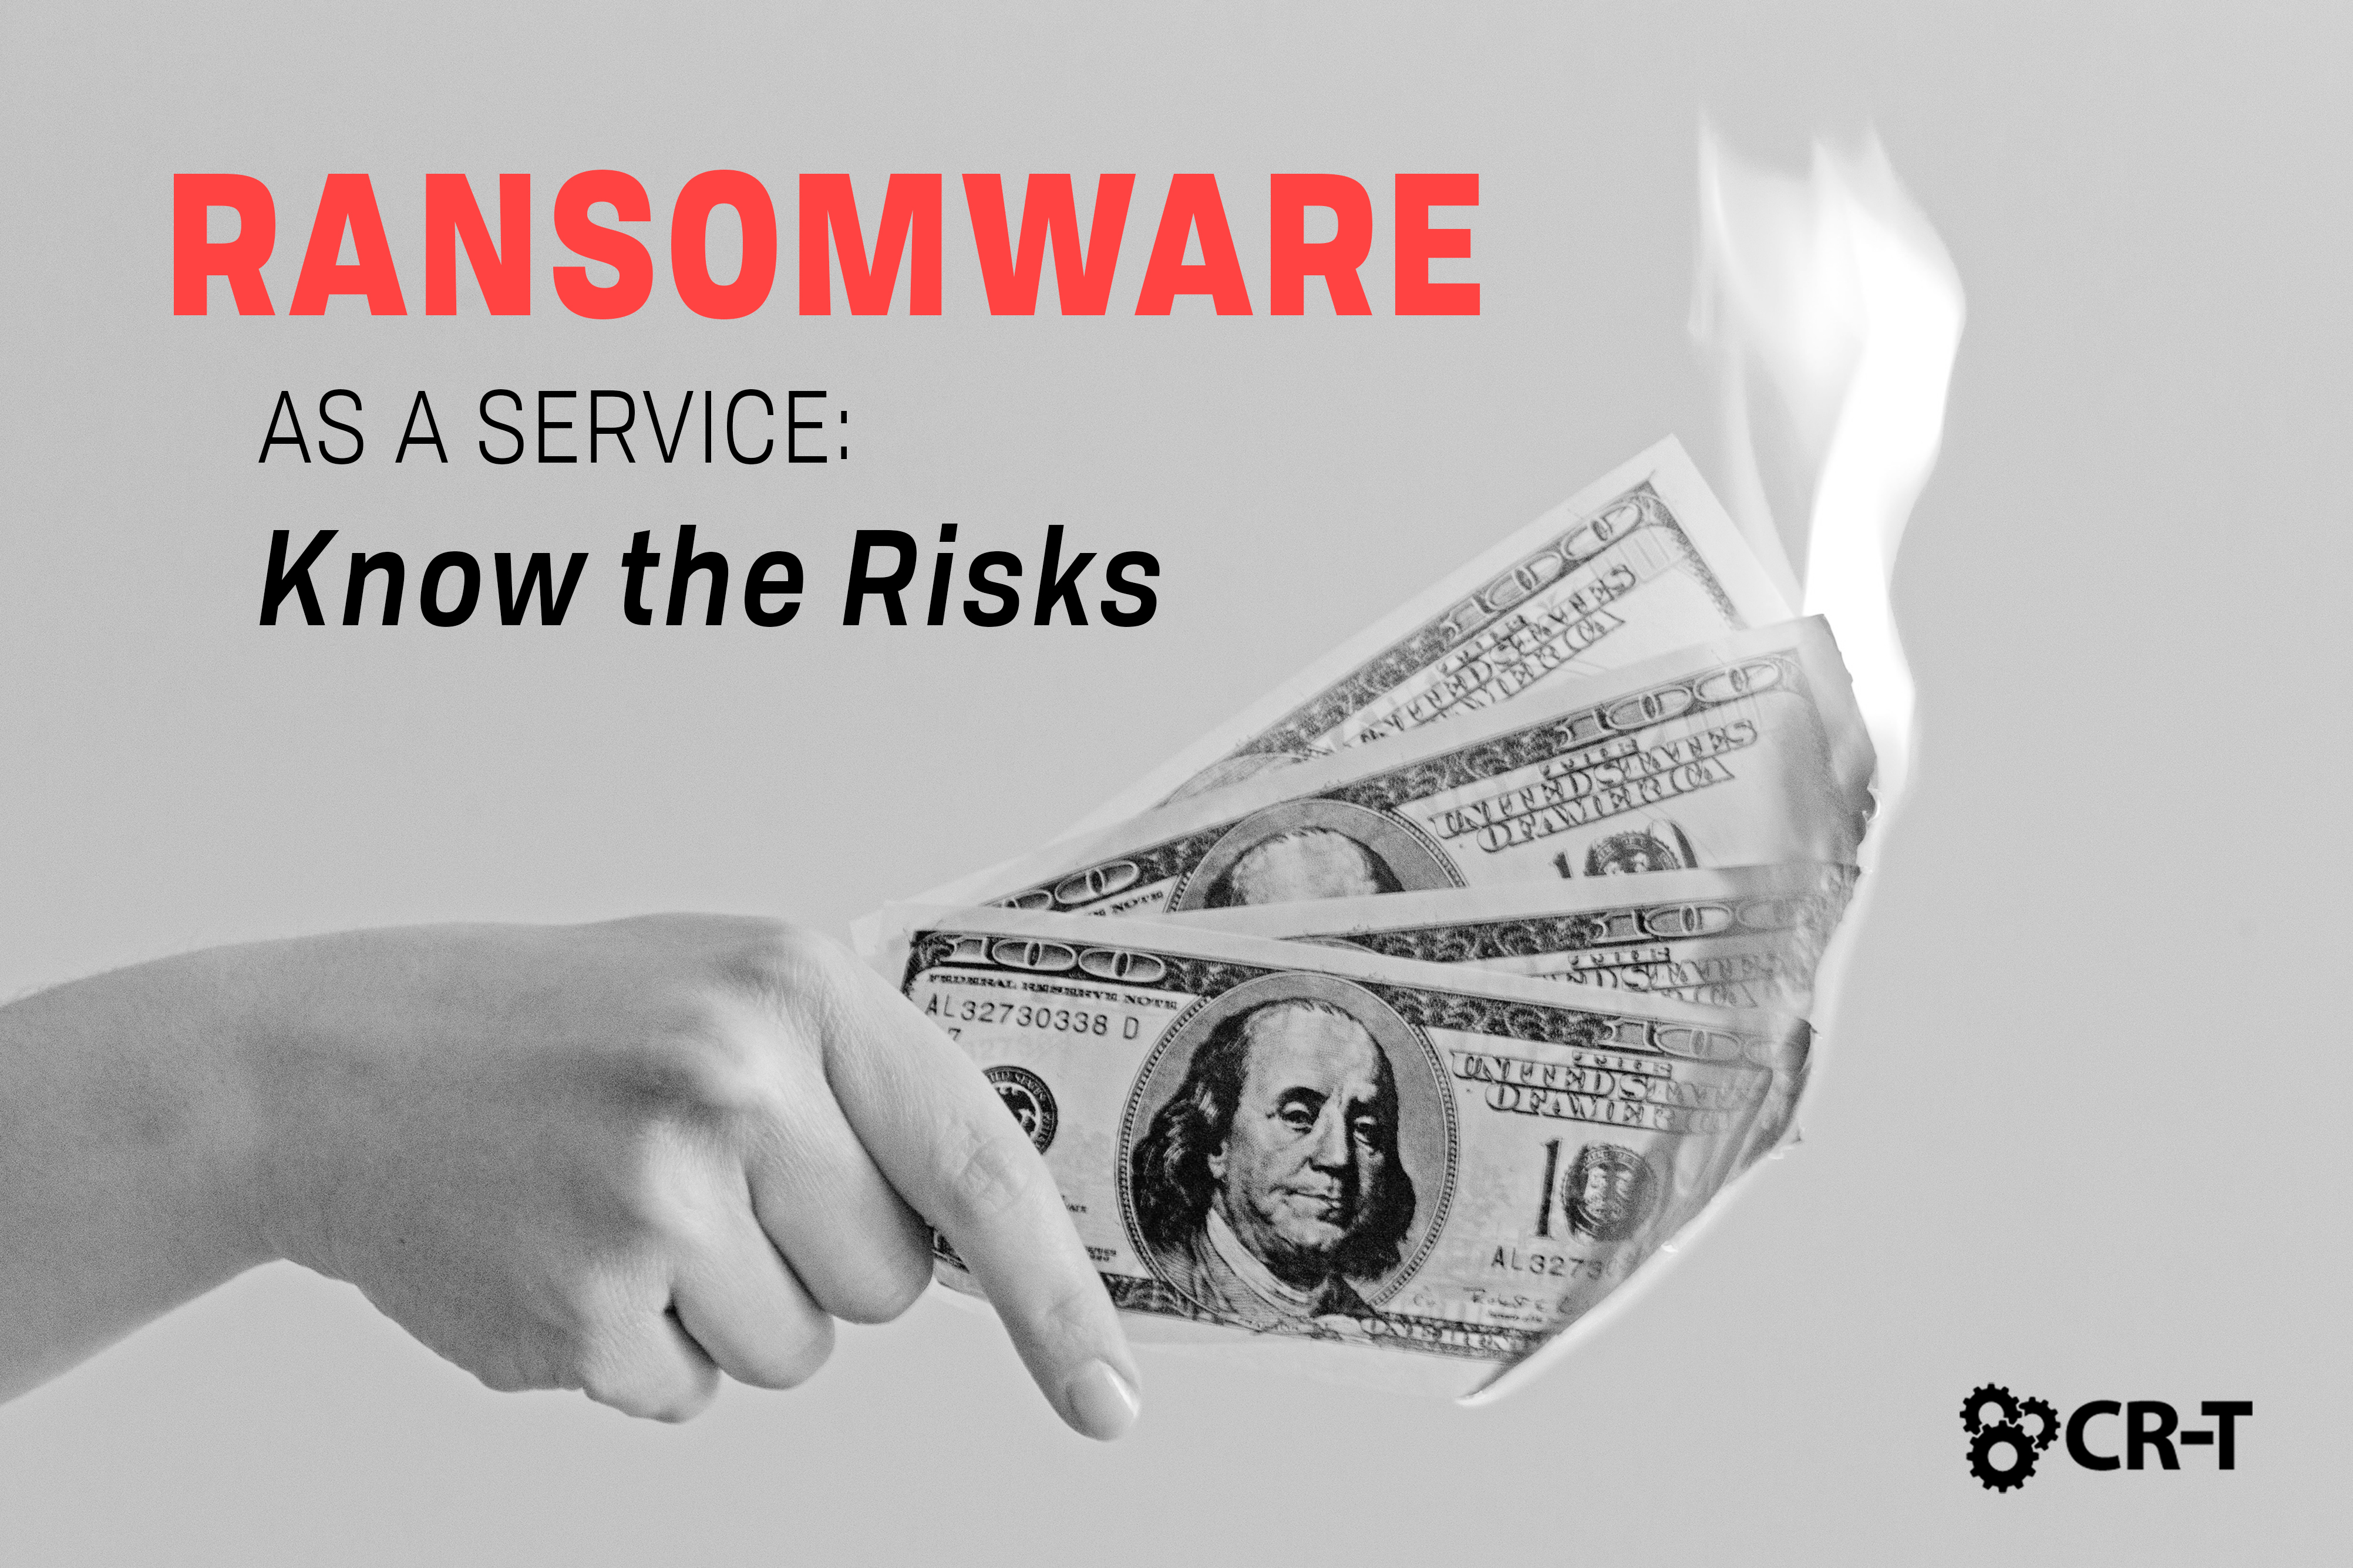 You are currently viewing Ransomware as a Service: Know the Risks